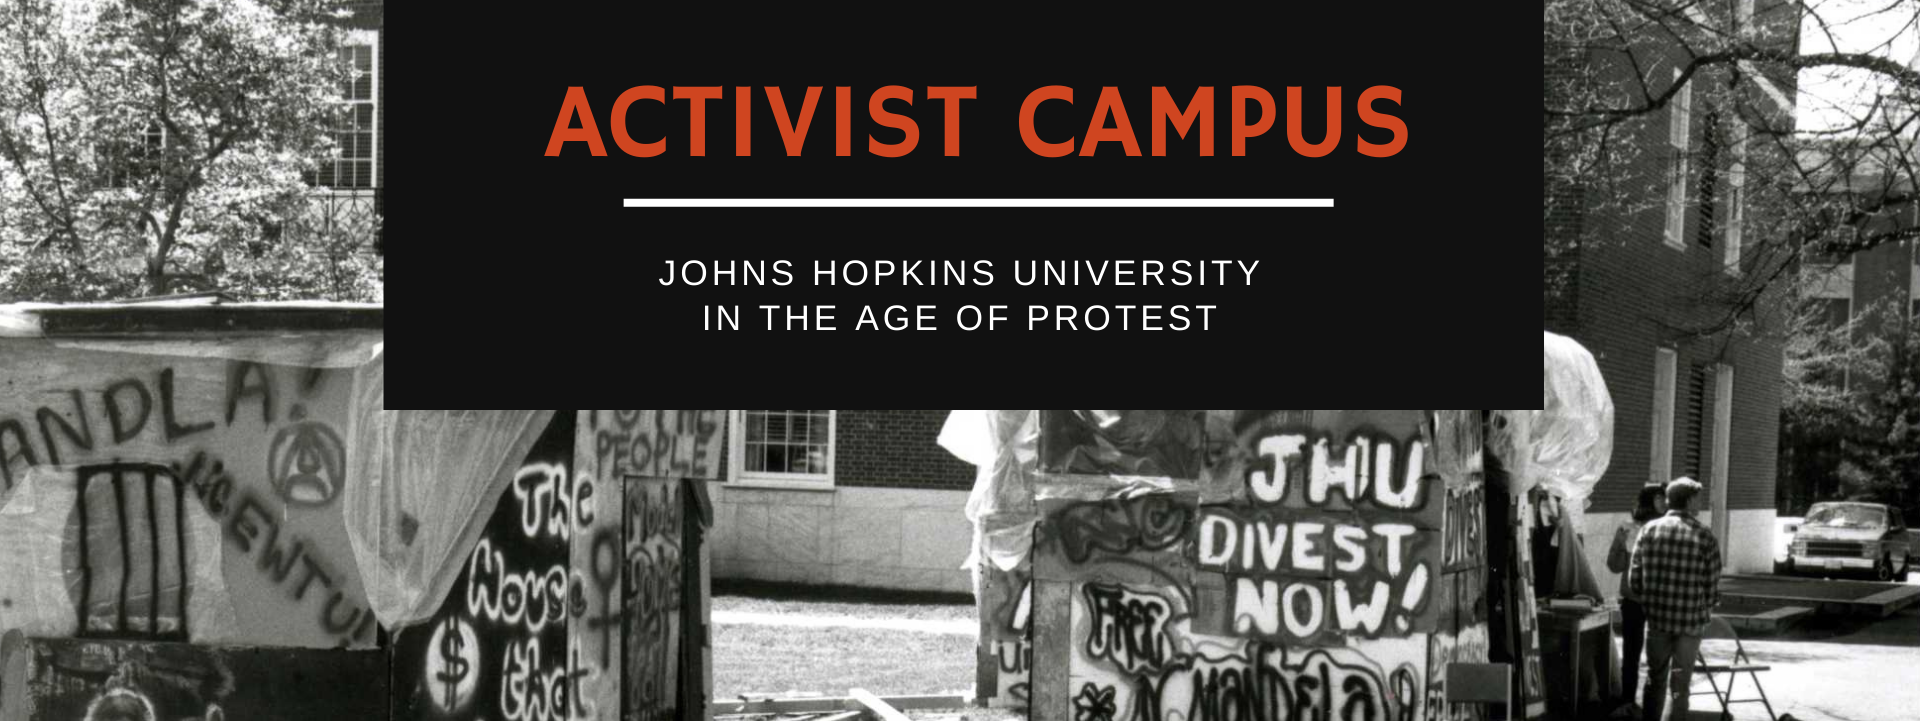 Graphic with text and black and white photograph. Text at the top reads Activist Campus in red letters and Johns Hopkins University in the Age of Protest in white smaller text. The photo behind shows wooden structure spray painted with words such as "Free Mandela" and "JHU Divest Now". Two students stand nearby.